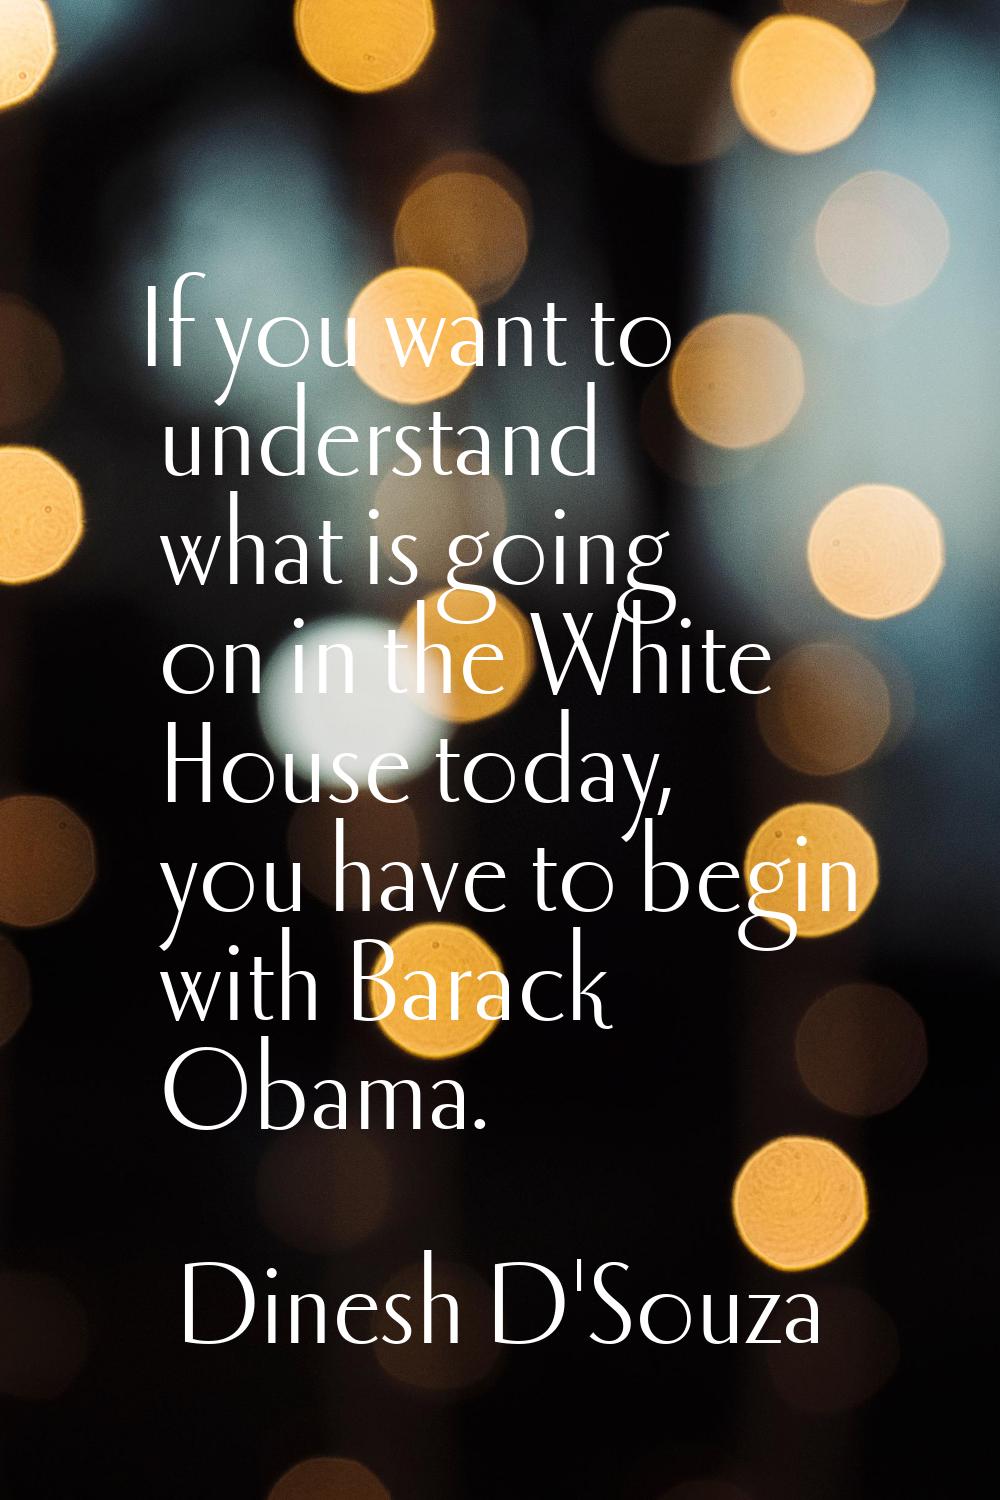 If you want to understand what is going on in the White House today, you have to begin with Barack 